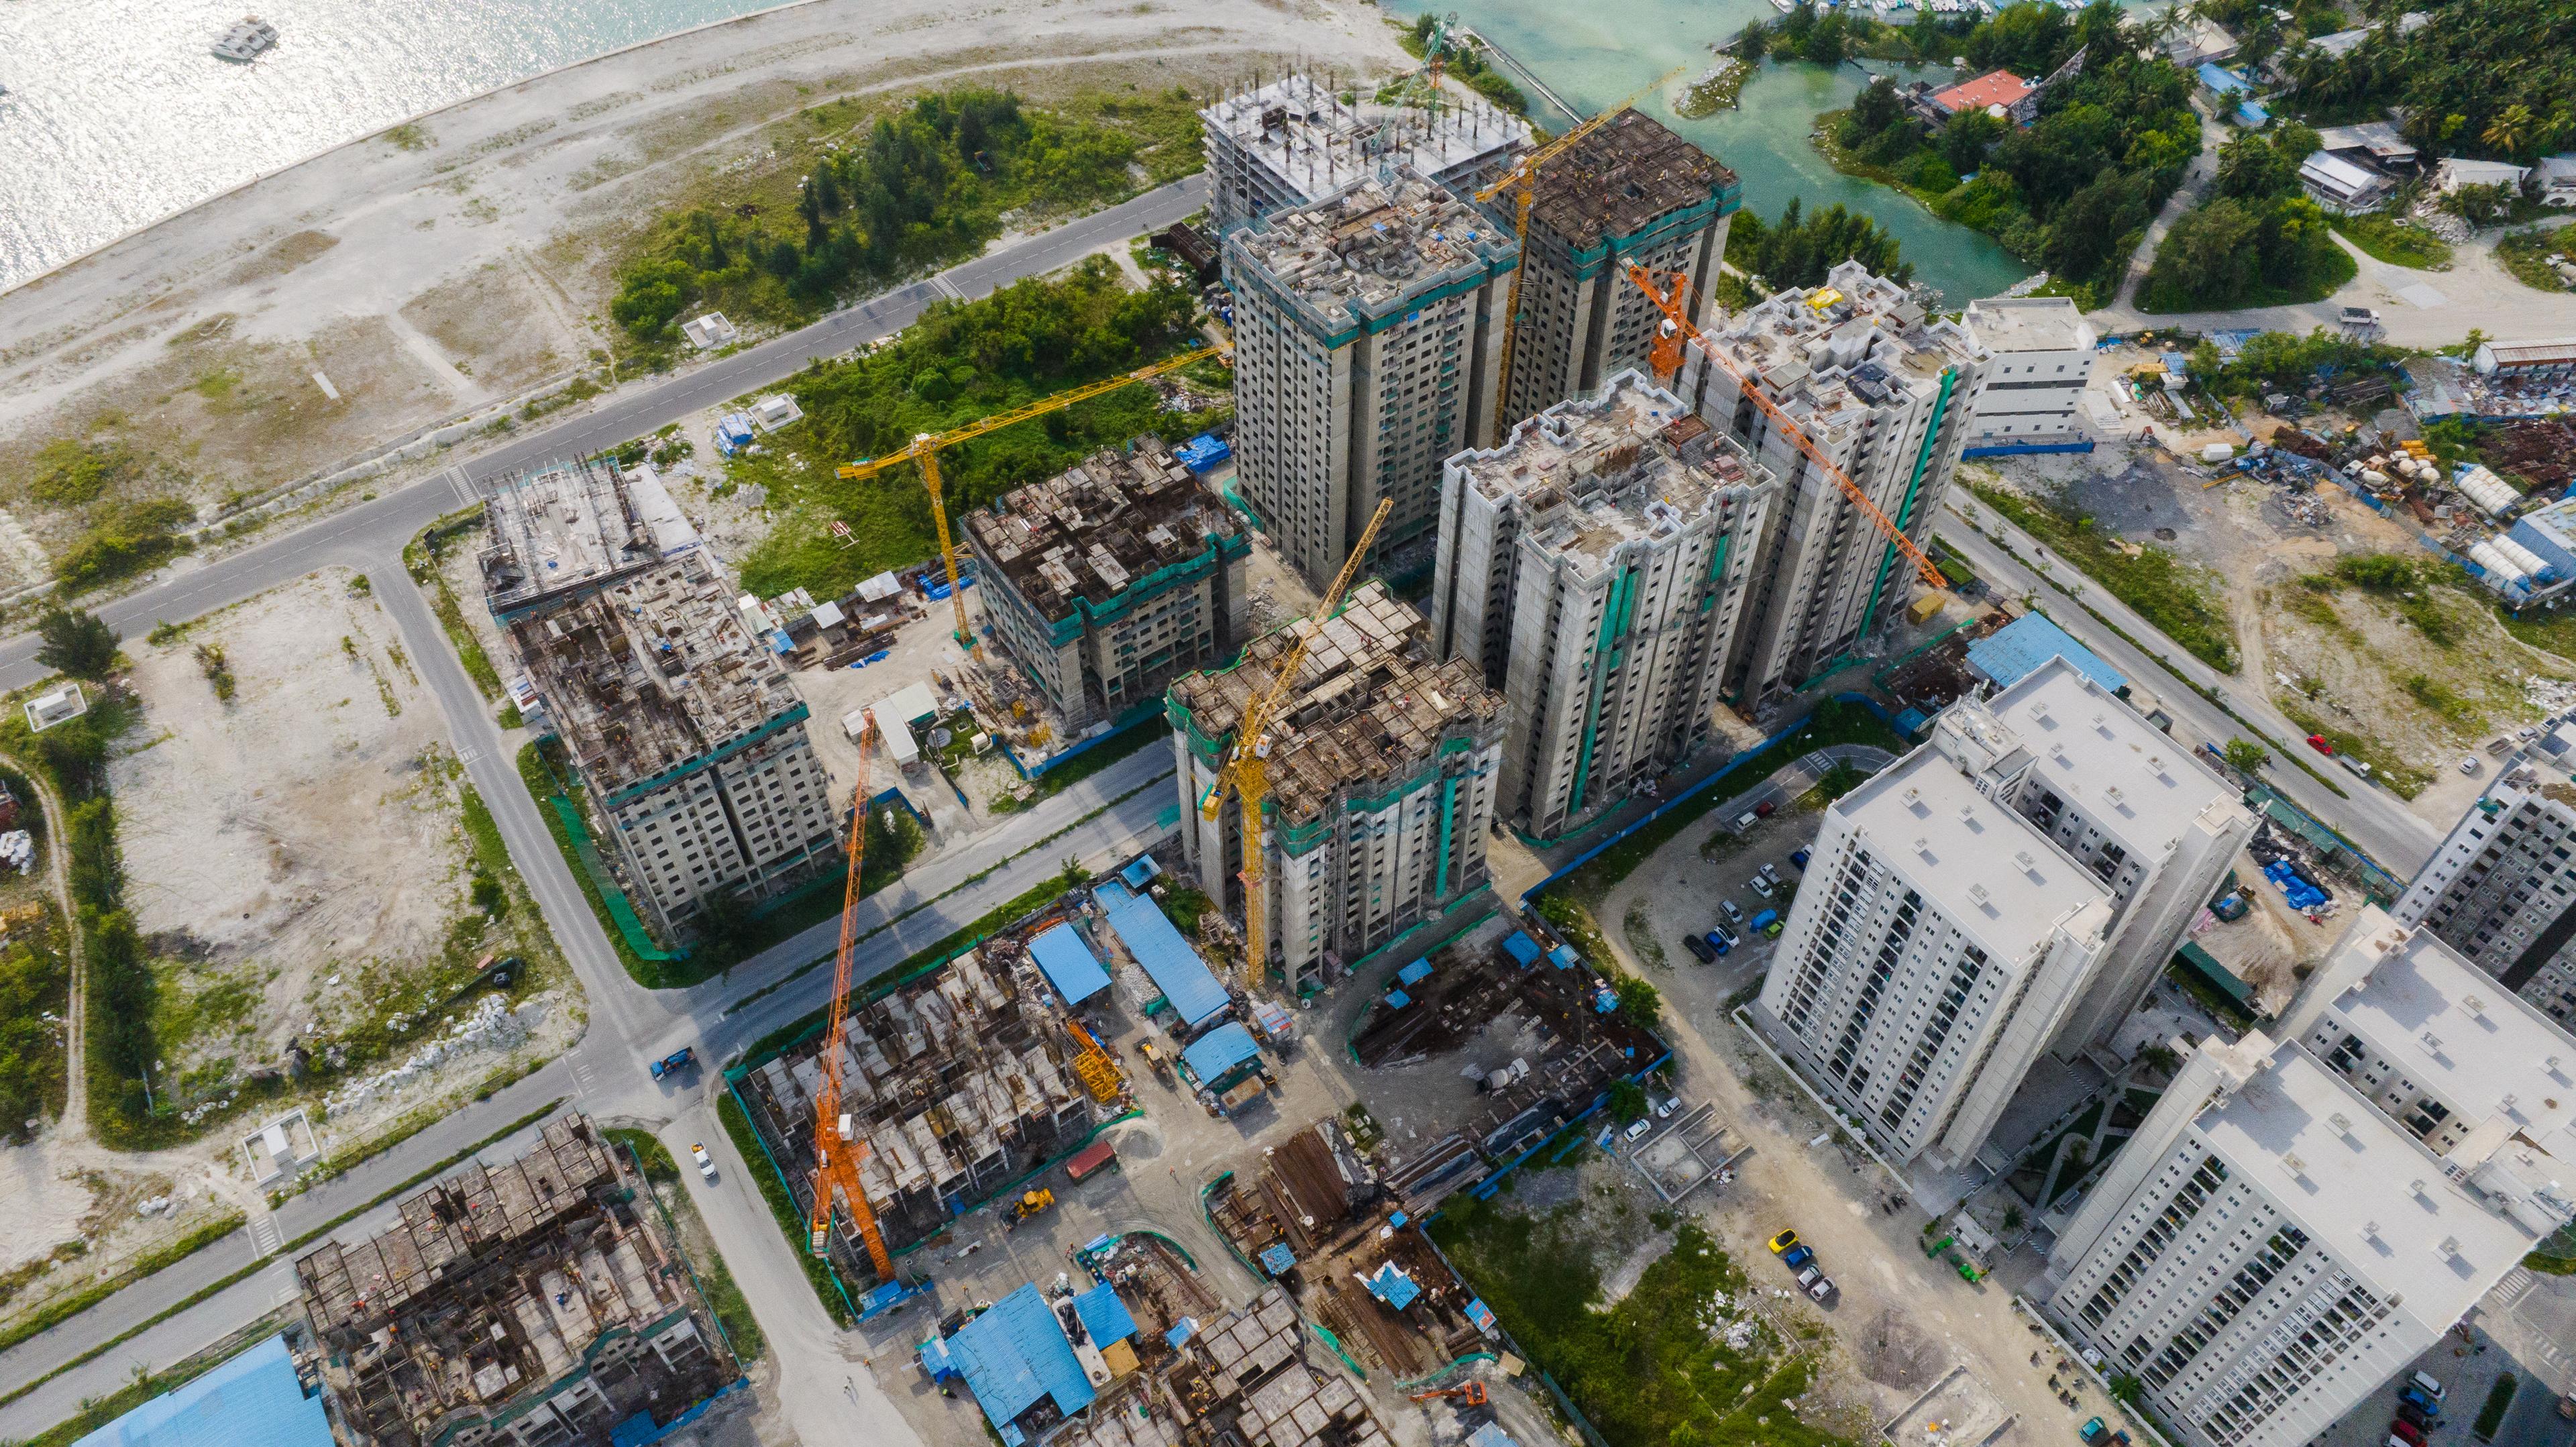 FDC completes concrete works for a total of 11 Towers